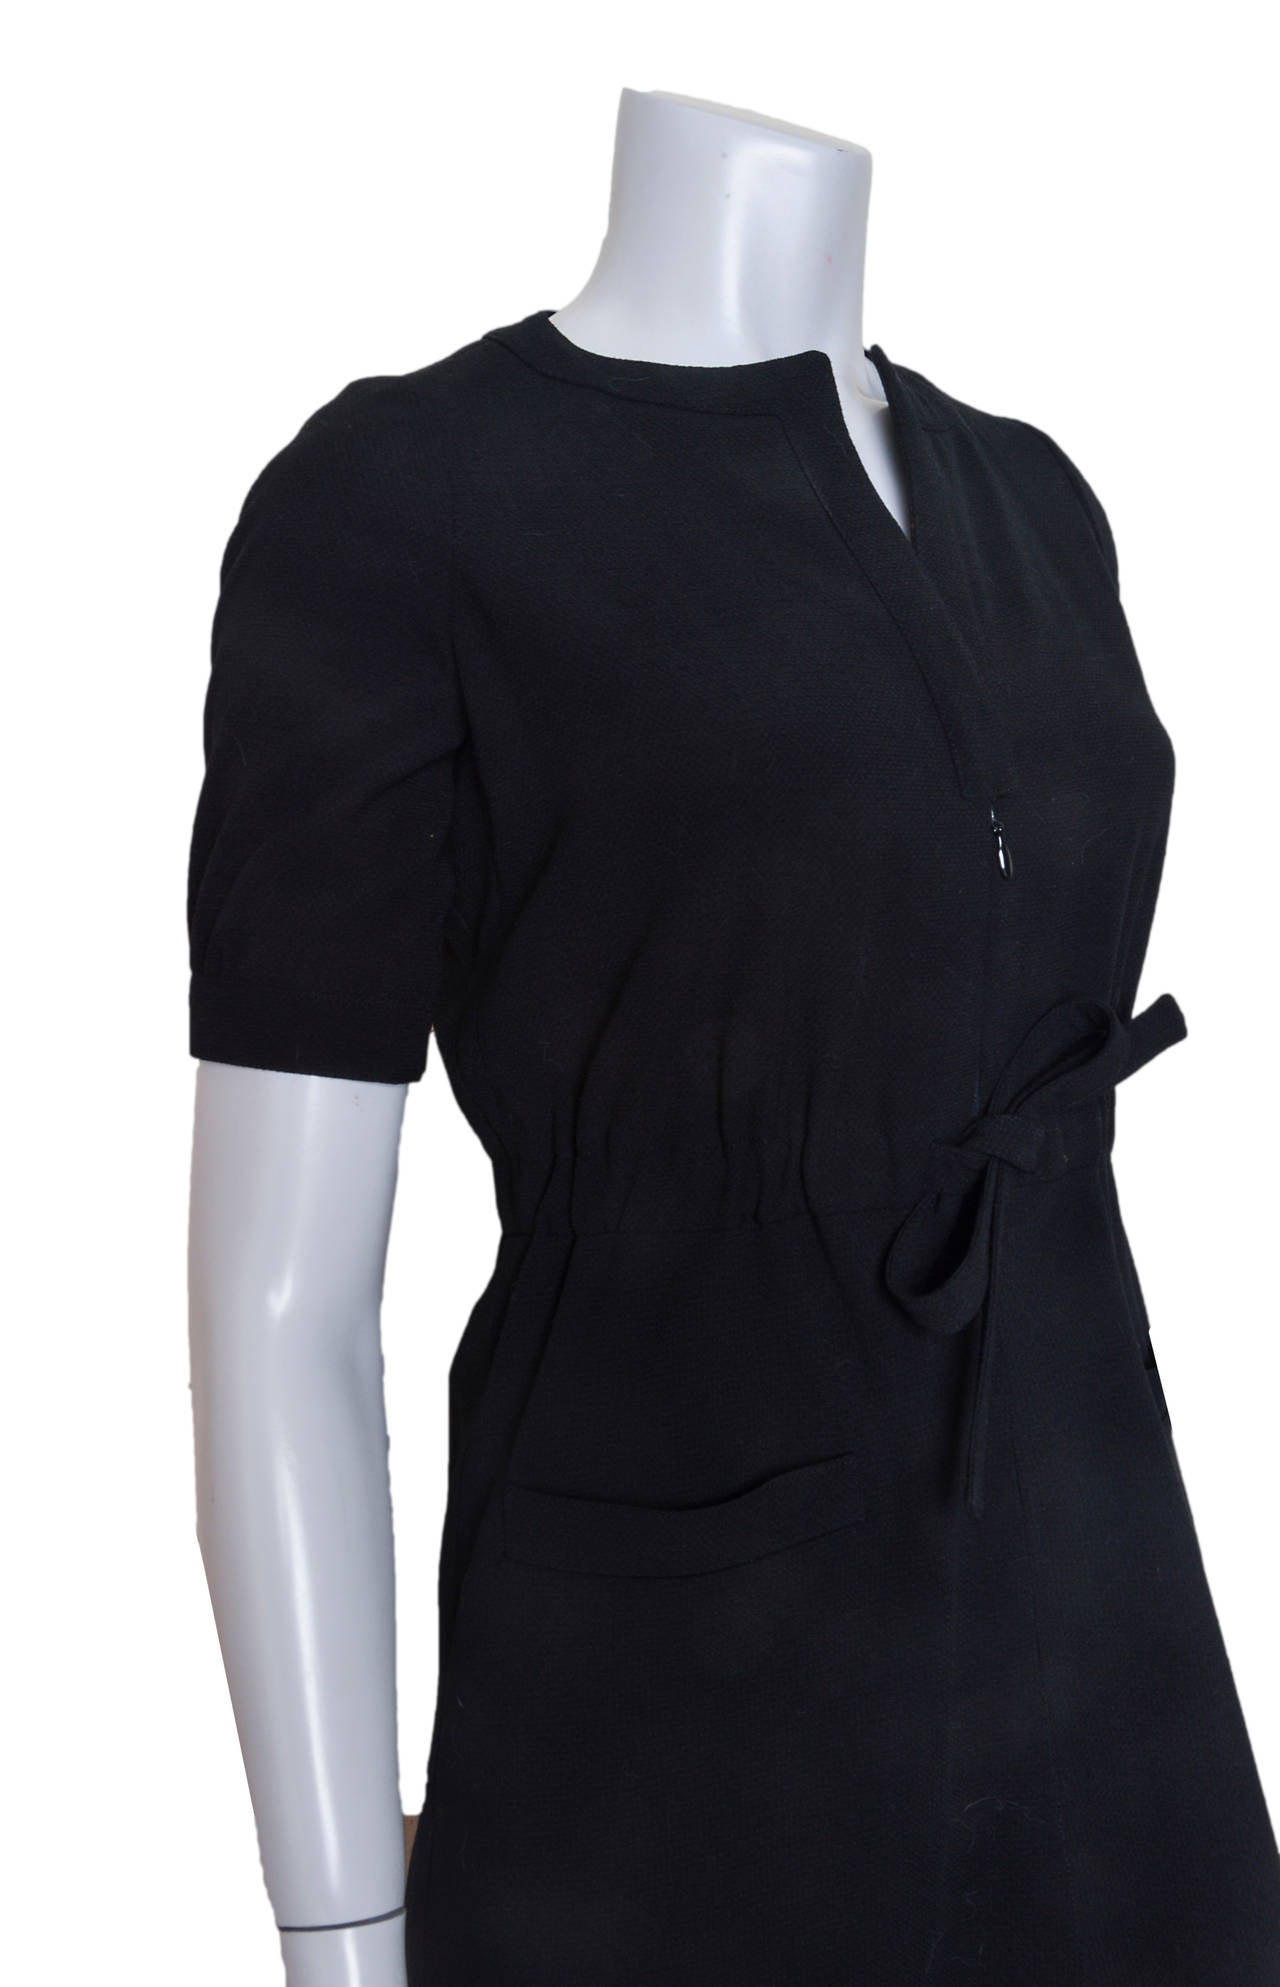 Classic black dress by Courreges Hyperbole.
Constructed, heavier weight fabric gives shape.
Stretch waistband with tie.
Banded short sleeves.
A-line skirt with pockets.
Fully lined.